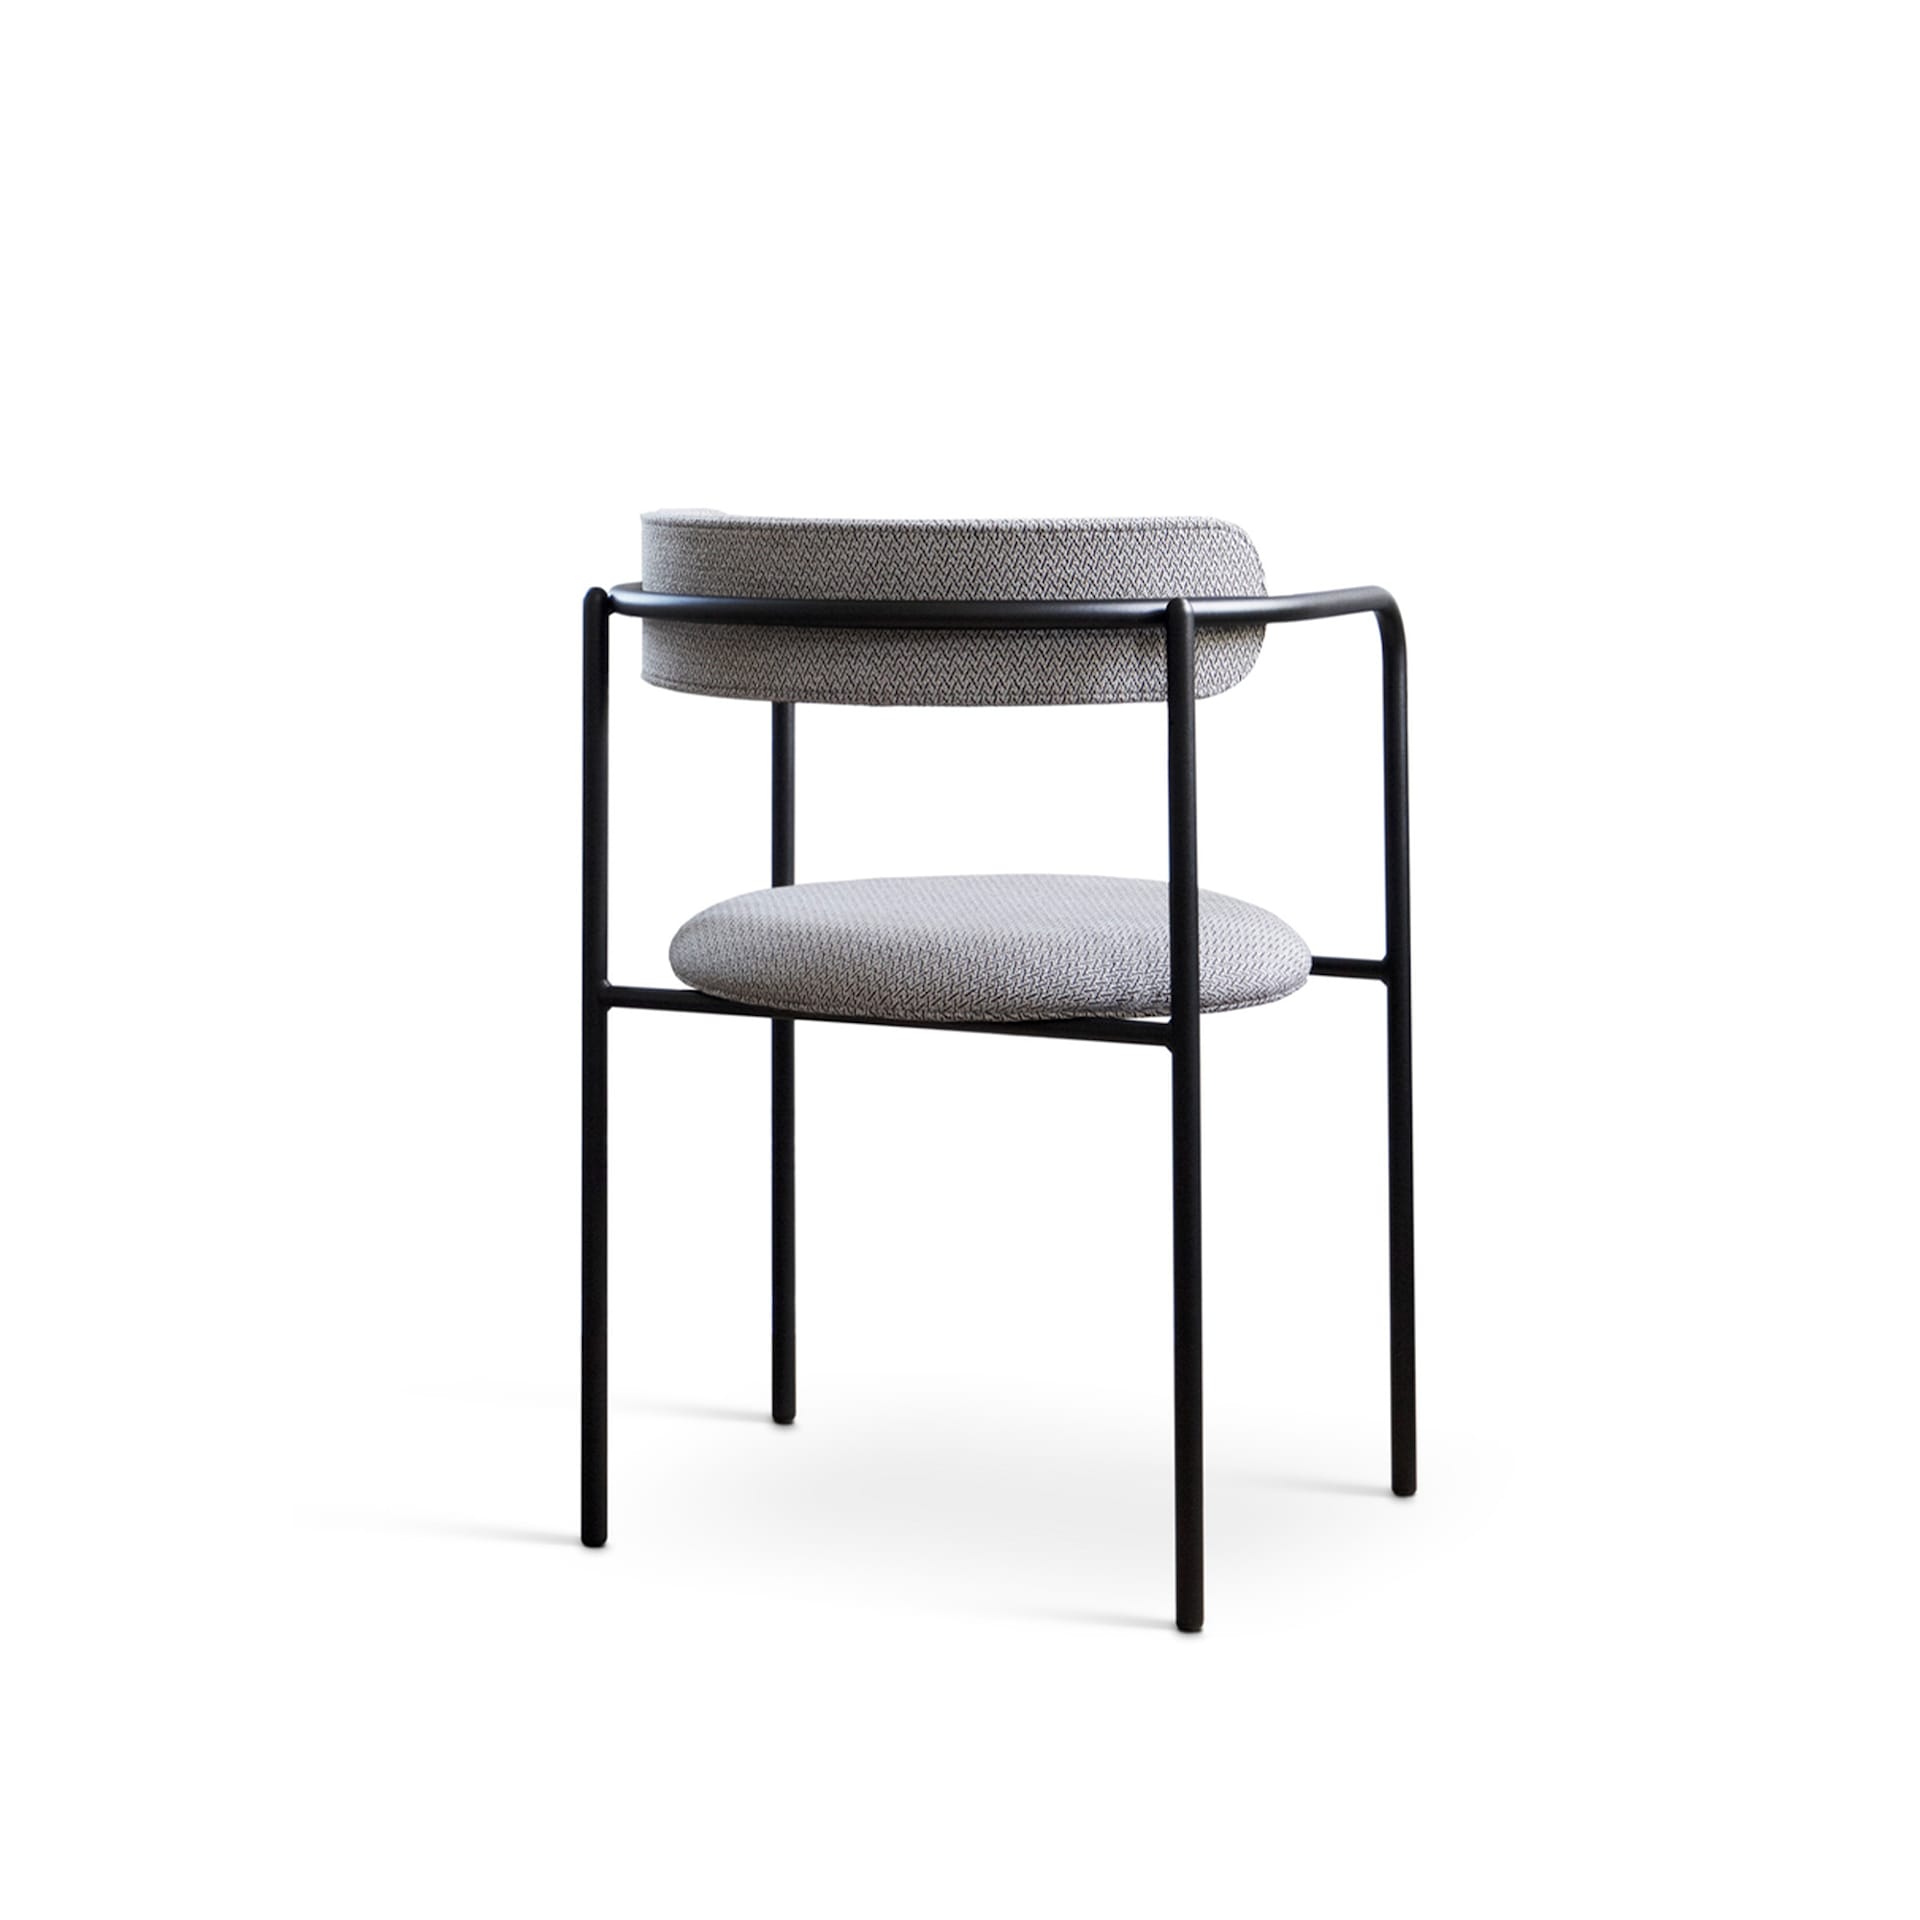 FF Chair Rounded Black Legs - Friends & Founders - NO GA